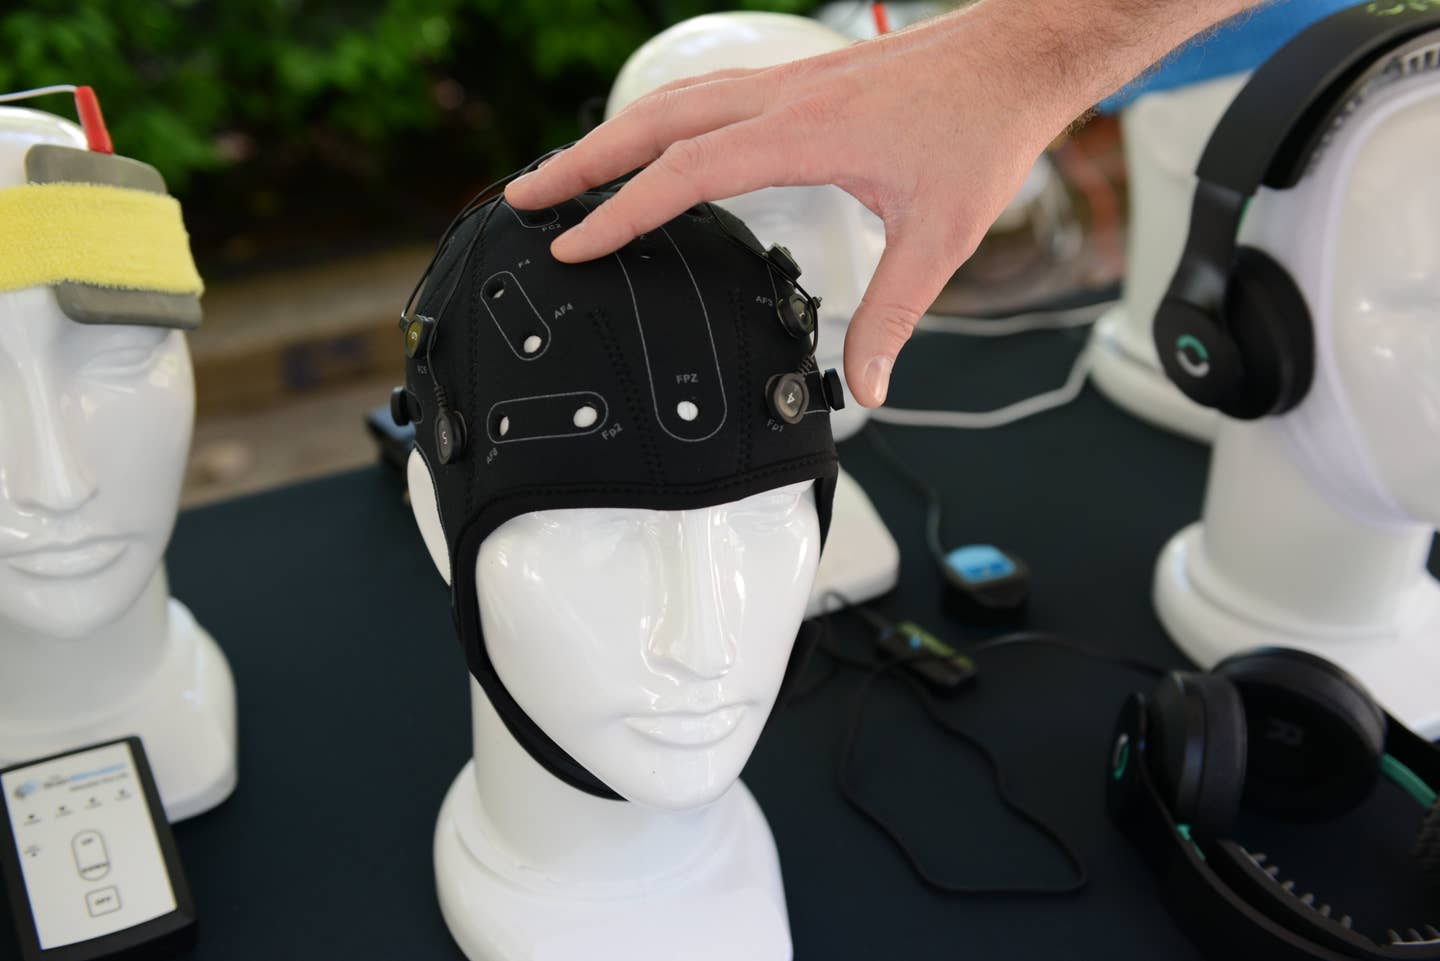 Dr. Aaron Gardony, cognitive scientist at the Natick Soldier Research, Development and Engineering Center, points out the type of headset that is normally used for neurostimulation research.